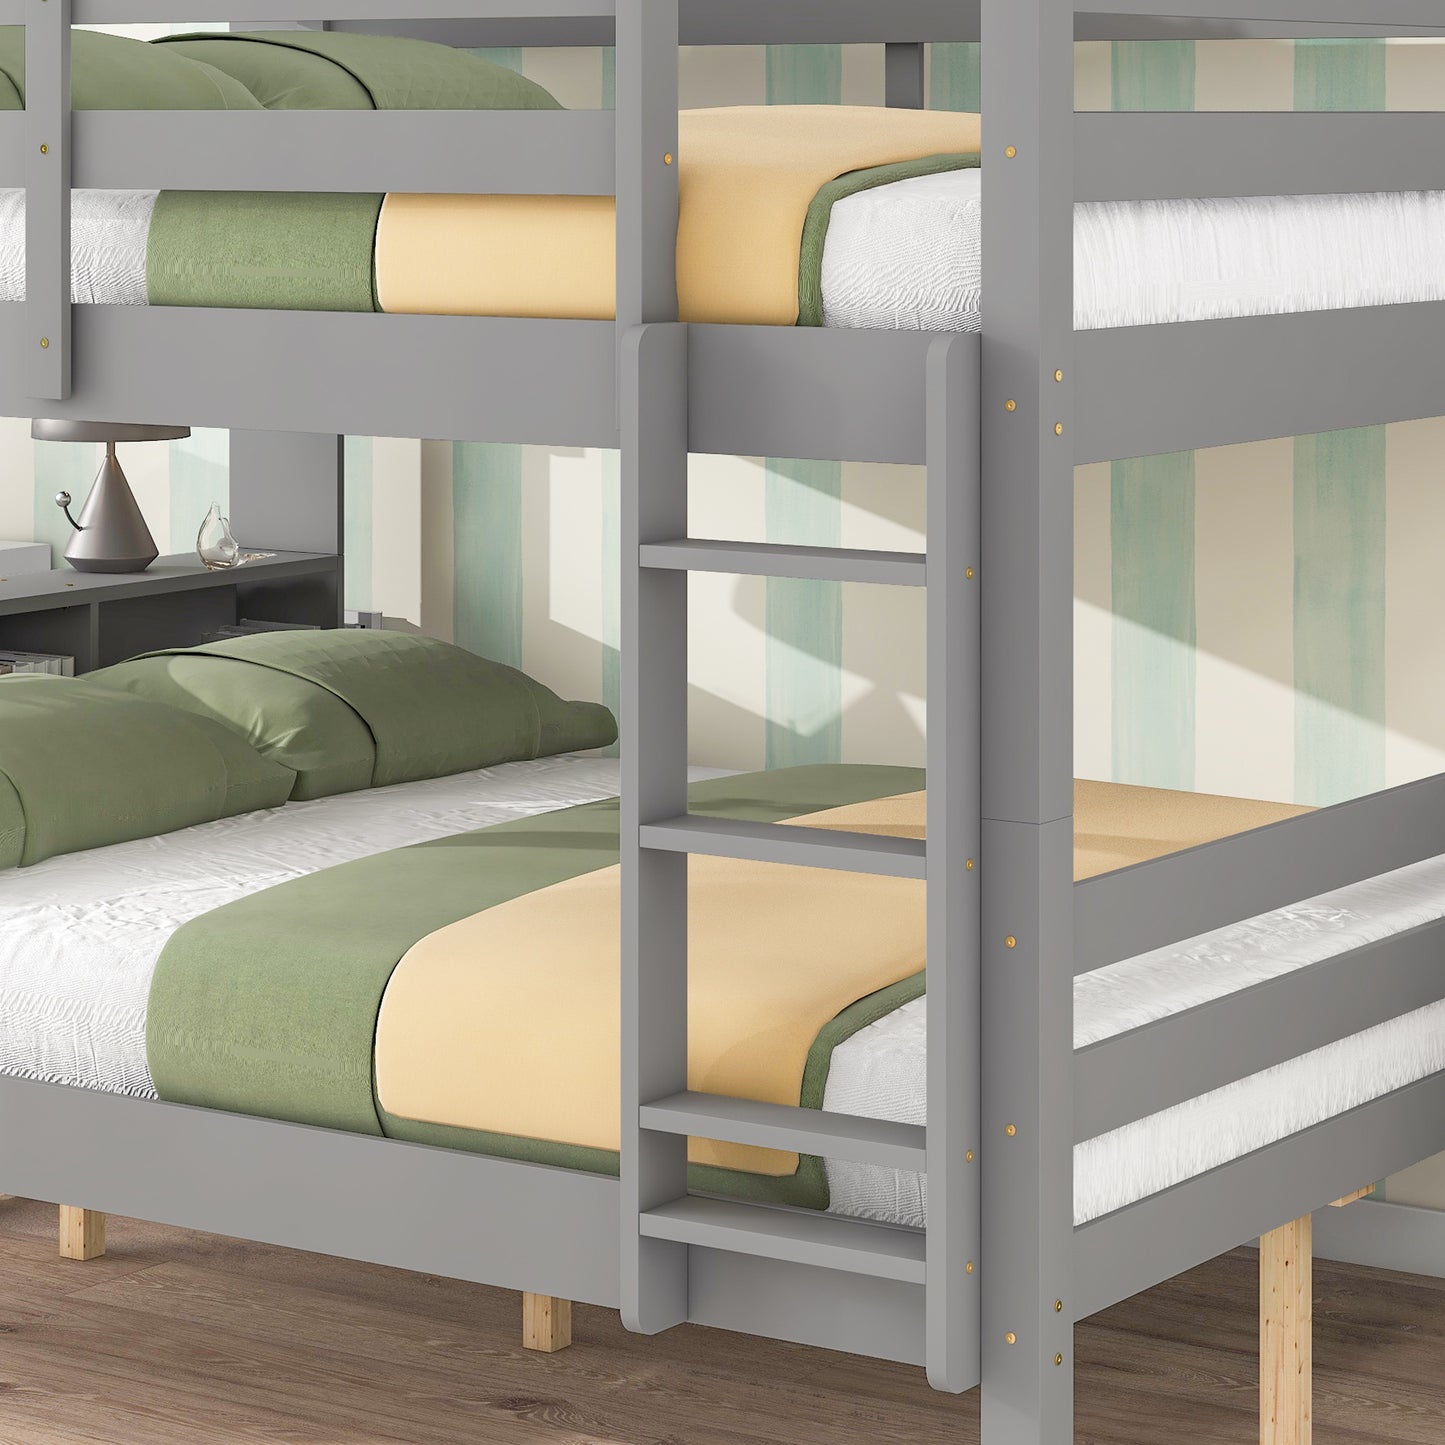 Liyarya Wood Bed  Full Over Full Bunk Beds with Bookcase Headboard, Solid Wood Bed Frame with Safety Rail and Ladder, Kids/Teens Bedroom, Guest Room Furniture, Can Be converted into 2 Beds, Grey